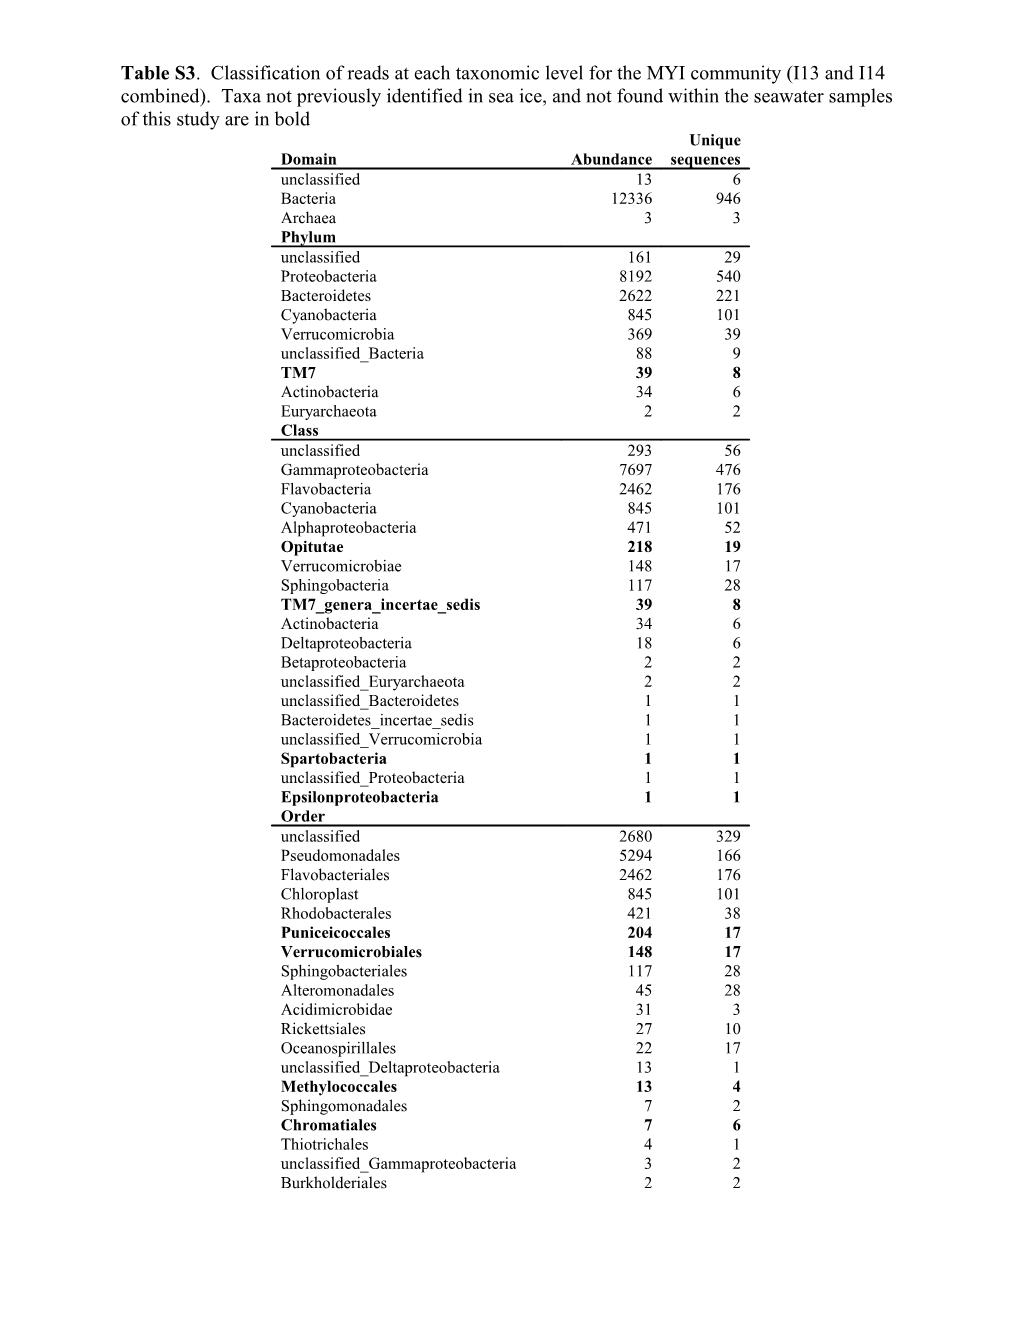 Table S3. Classification of Reads at Each Taxonomic Level for the MYI Community (I13 And